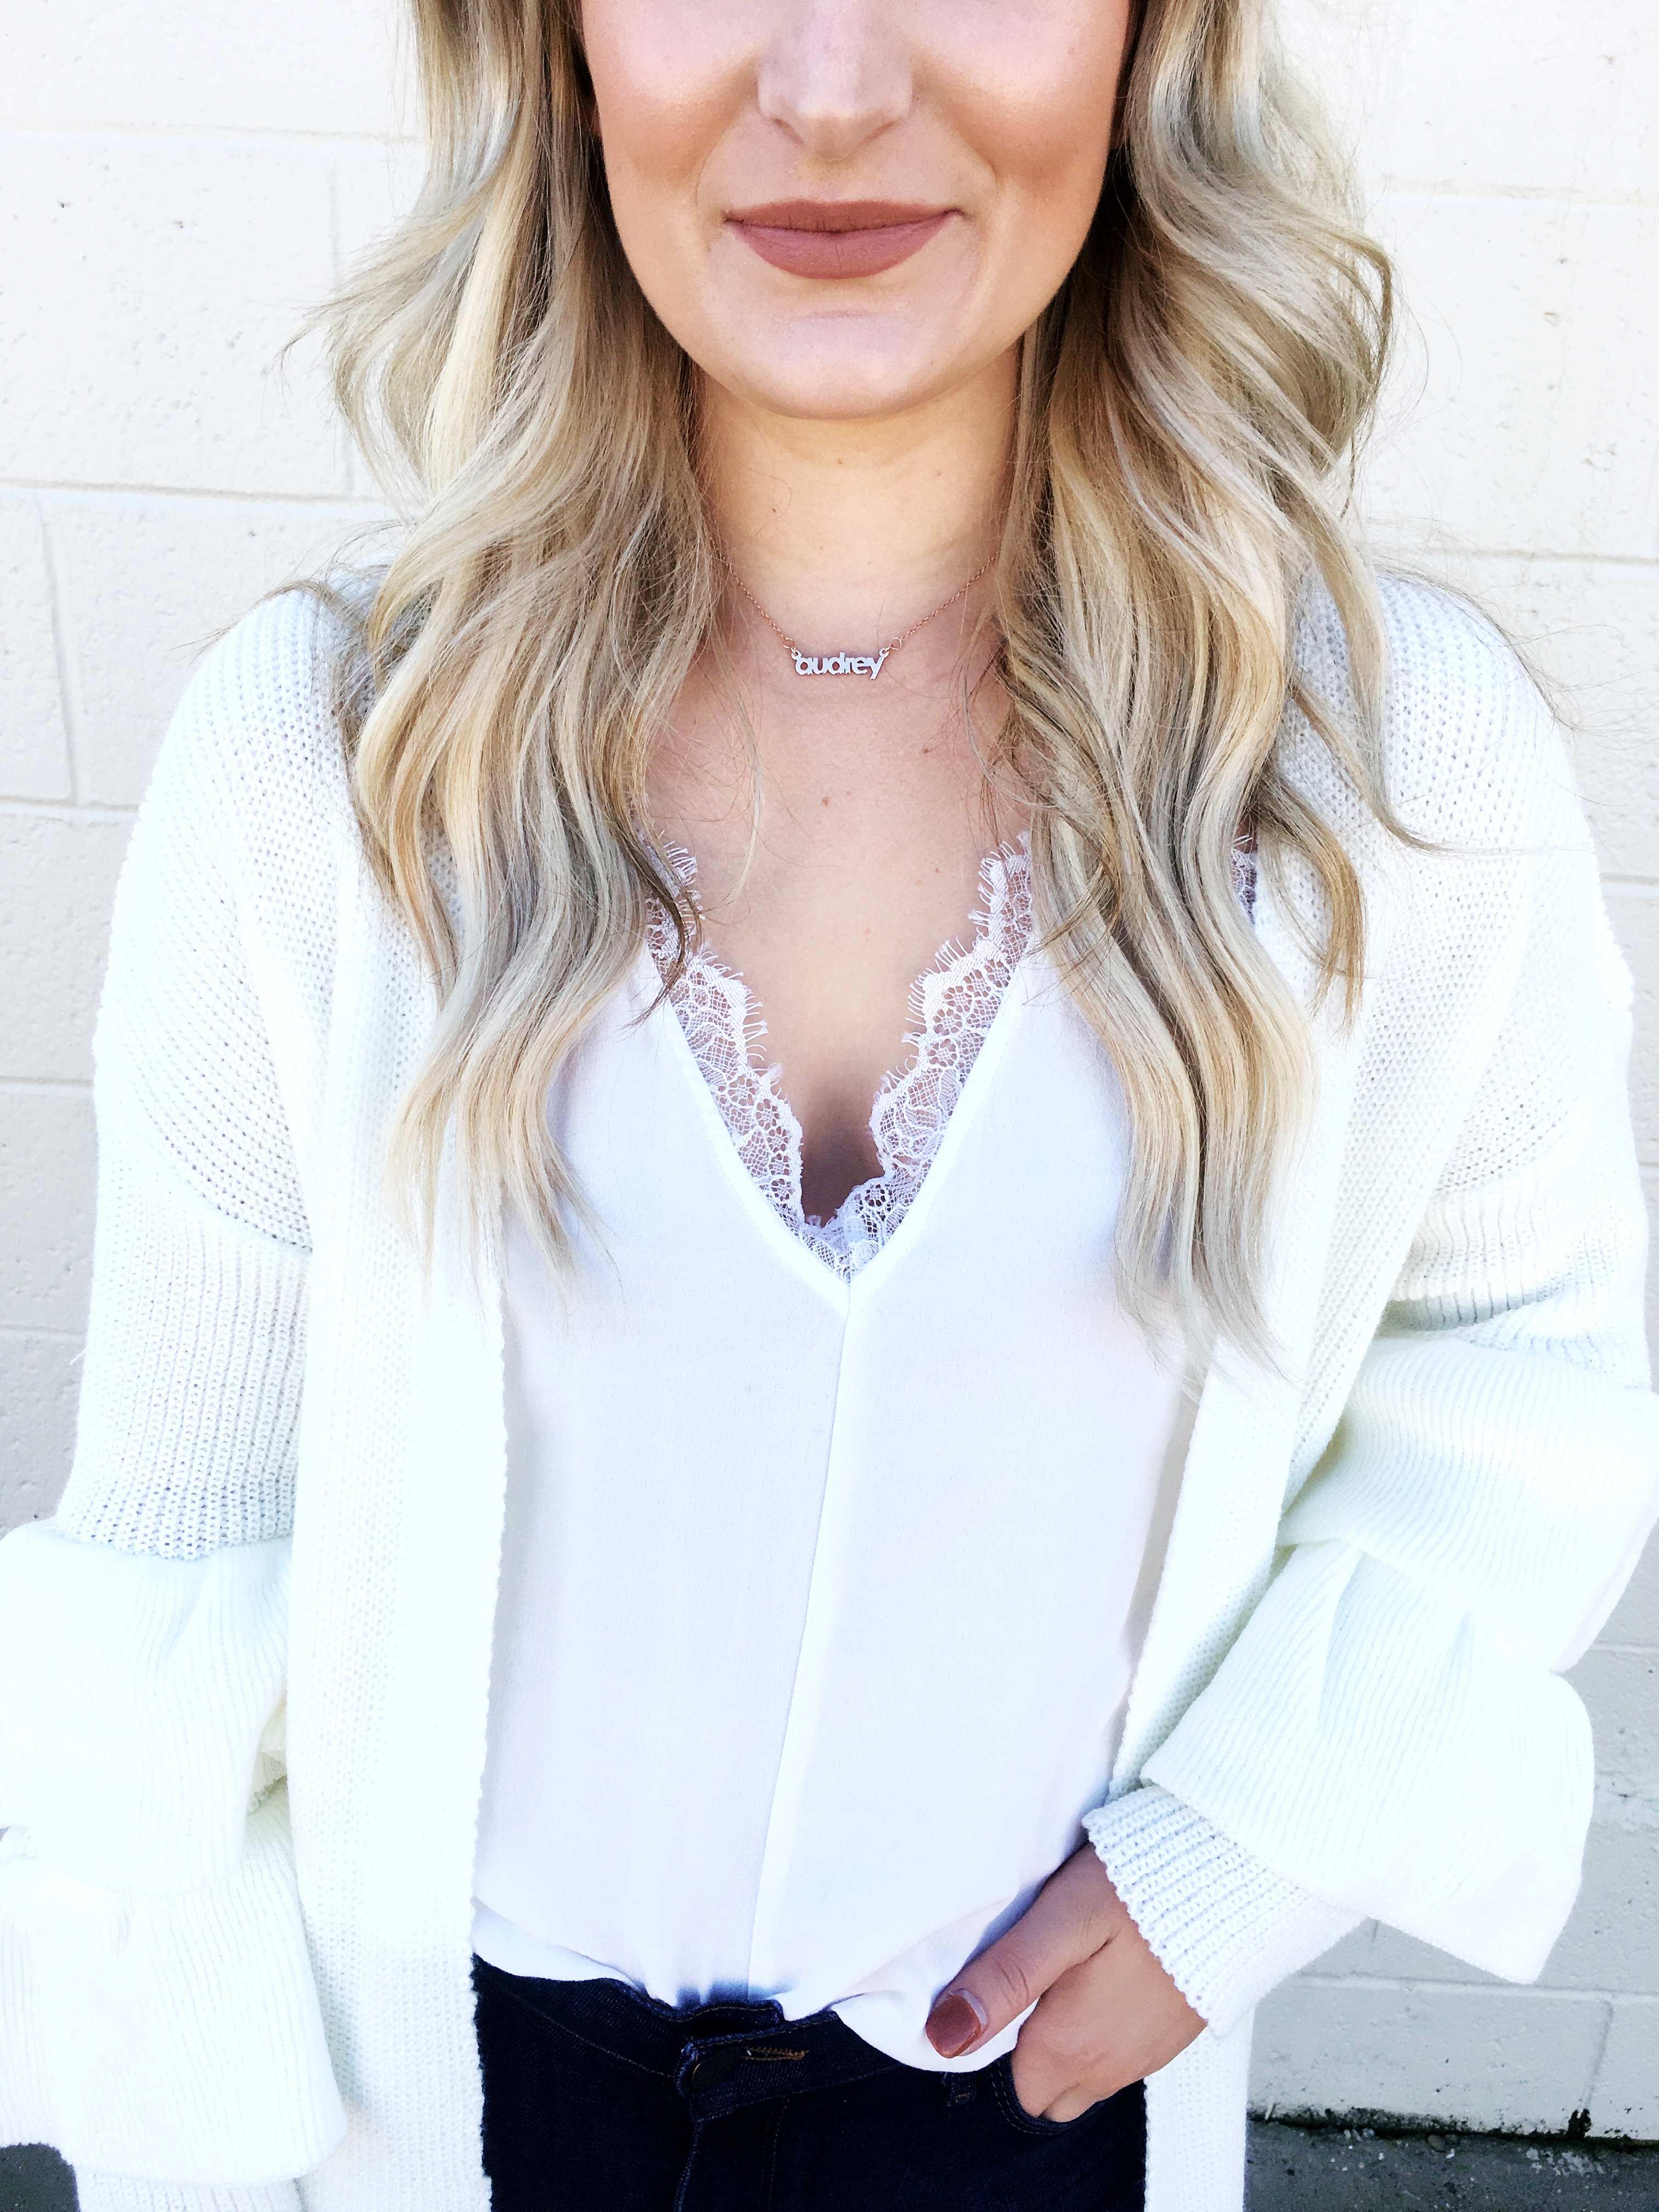 Instagram Roundup | Brook & York necklace | Audrey Madison Stowe a fashion and lifestyle blogger based in Texas  - Instagram Fashion Roundup featured by popular Texas fashion blogger, Audrey Madison Stowe